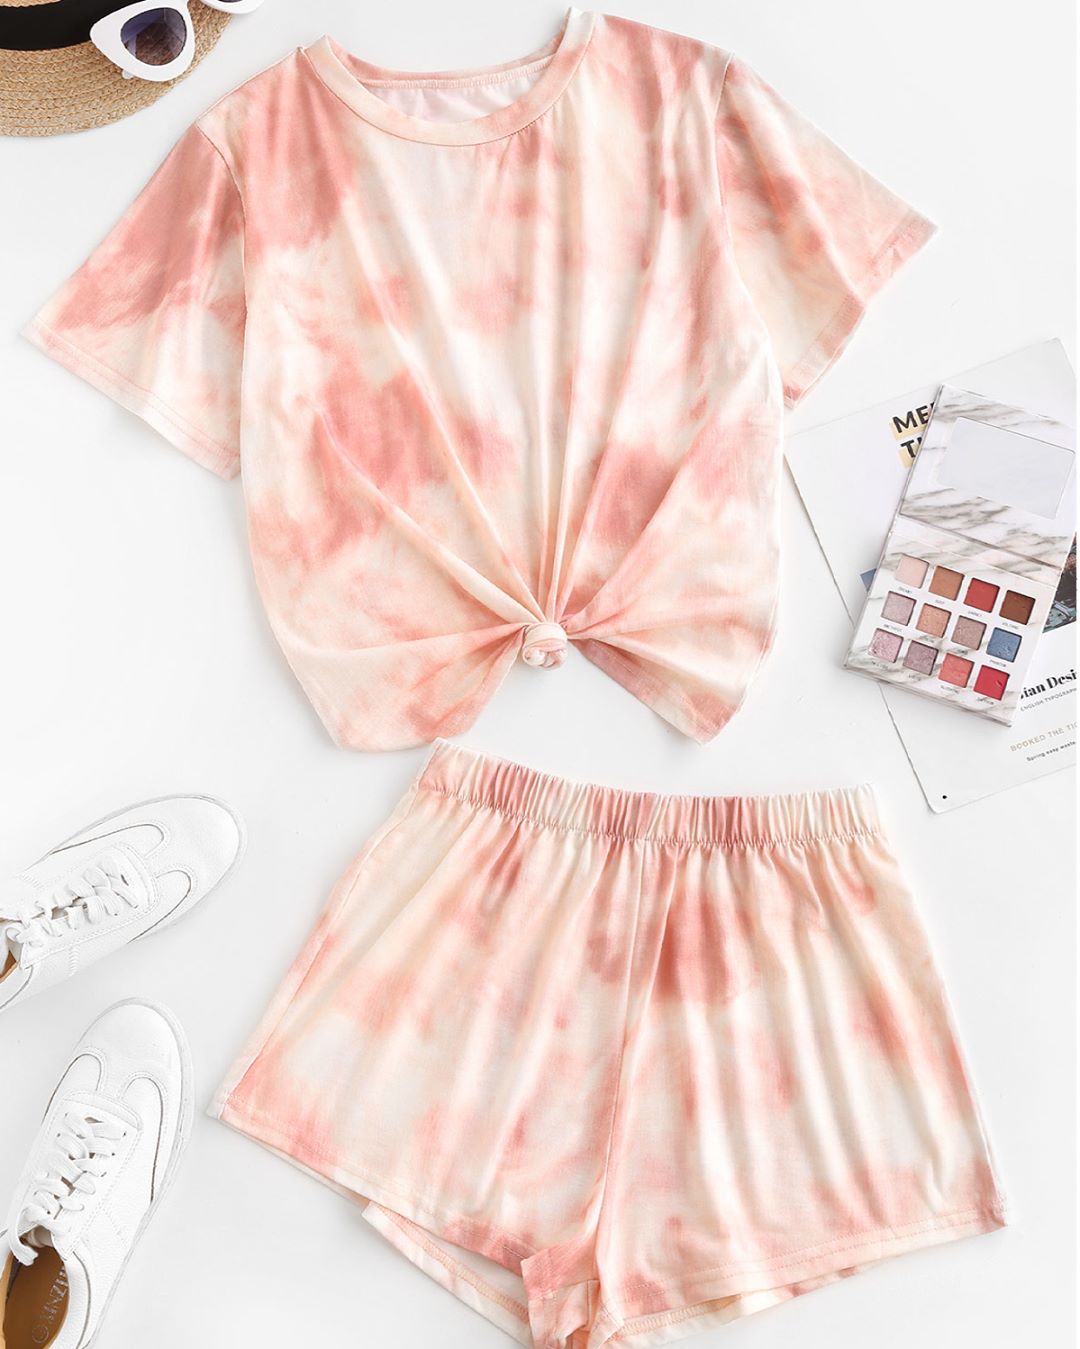 ZAFUL.com - Tie Dye Lounge Two Piece Set 🤗😘 . Tap to shop or shop via the 🔗 in bio.⁣⁣⁣⁣⁣⁣⁣⁣⁣⁣⁣⁣⁣⁣
.⁣⁣⁣⁣⁣⁣⁣⁣⁣⁣⁣⁣⁣⁣
⁣⁣⁣⁣⁣⁣⁣⁣⁣⁣⁣⁣⁣⁣
Search ID: 468864712⁣
⁣⁣⁣⁣⁣⁣
.⁣⁣⁣⁣⁣⁣⁣⁣⁣⁣⁣⁣⁣⁣
⚡Discount code: PZF520 (18...